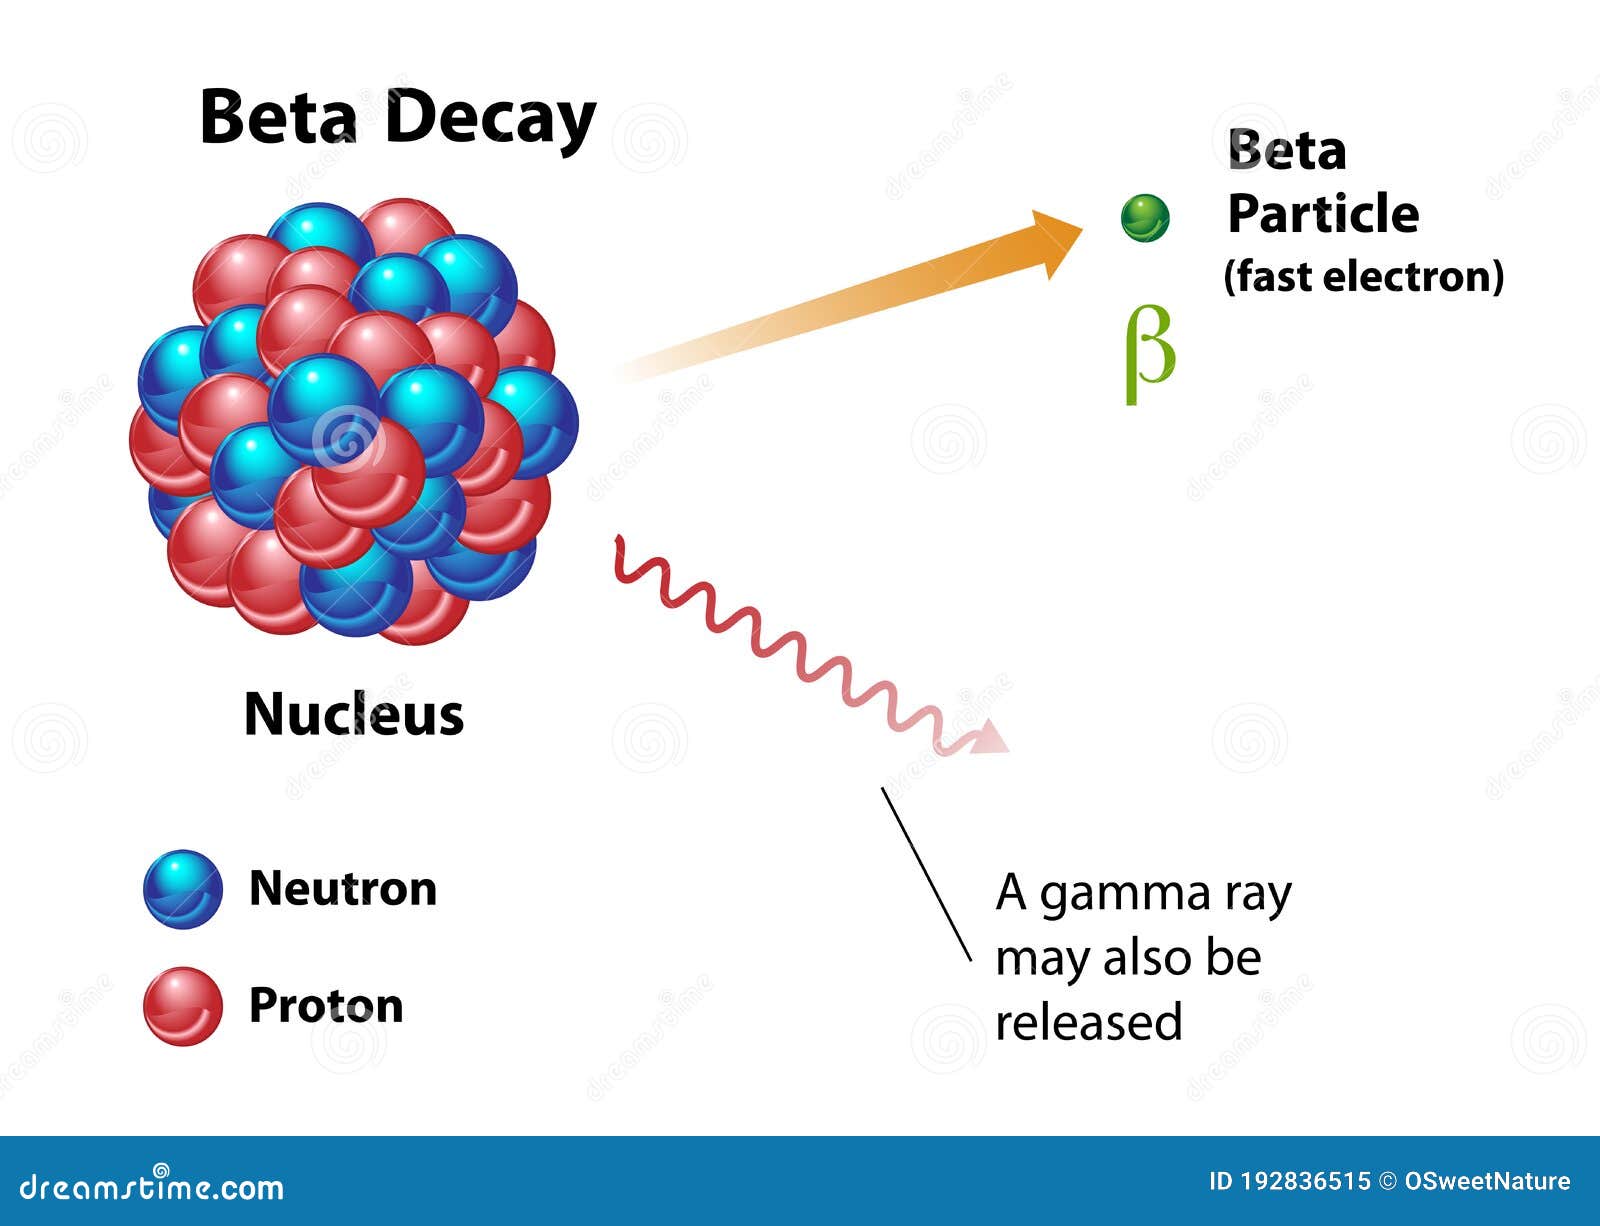 beta decay radiation release of beta particle